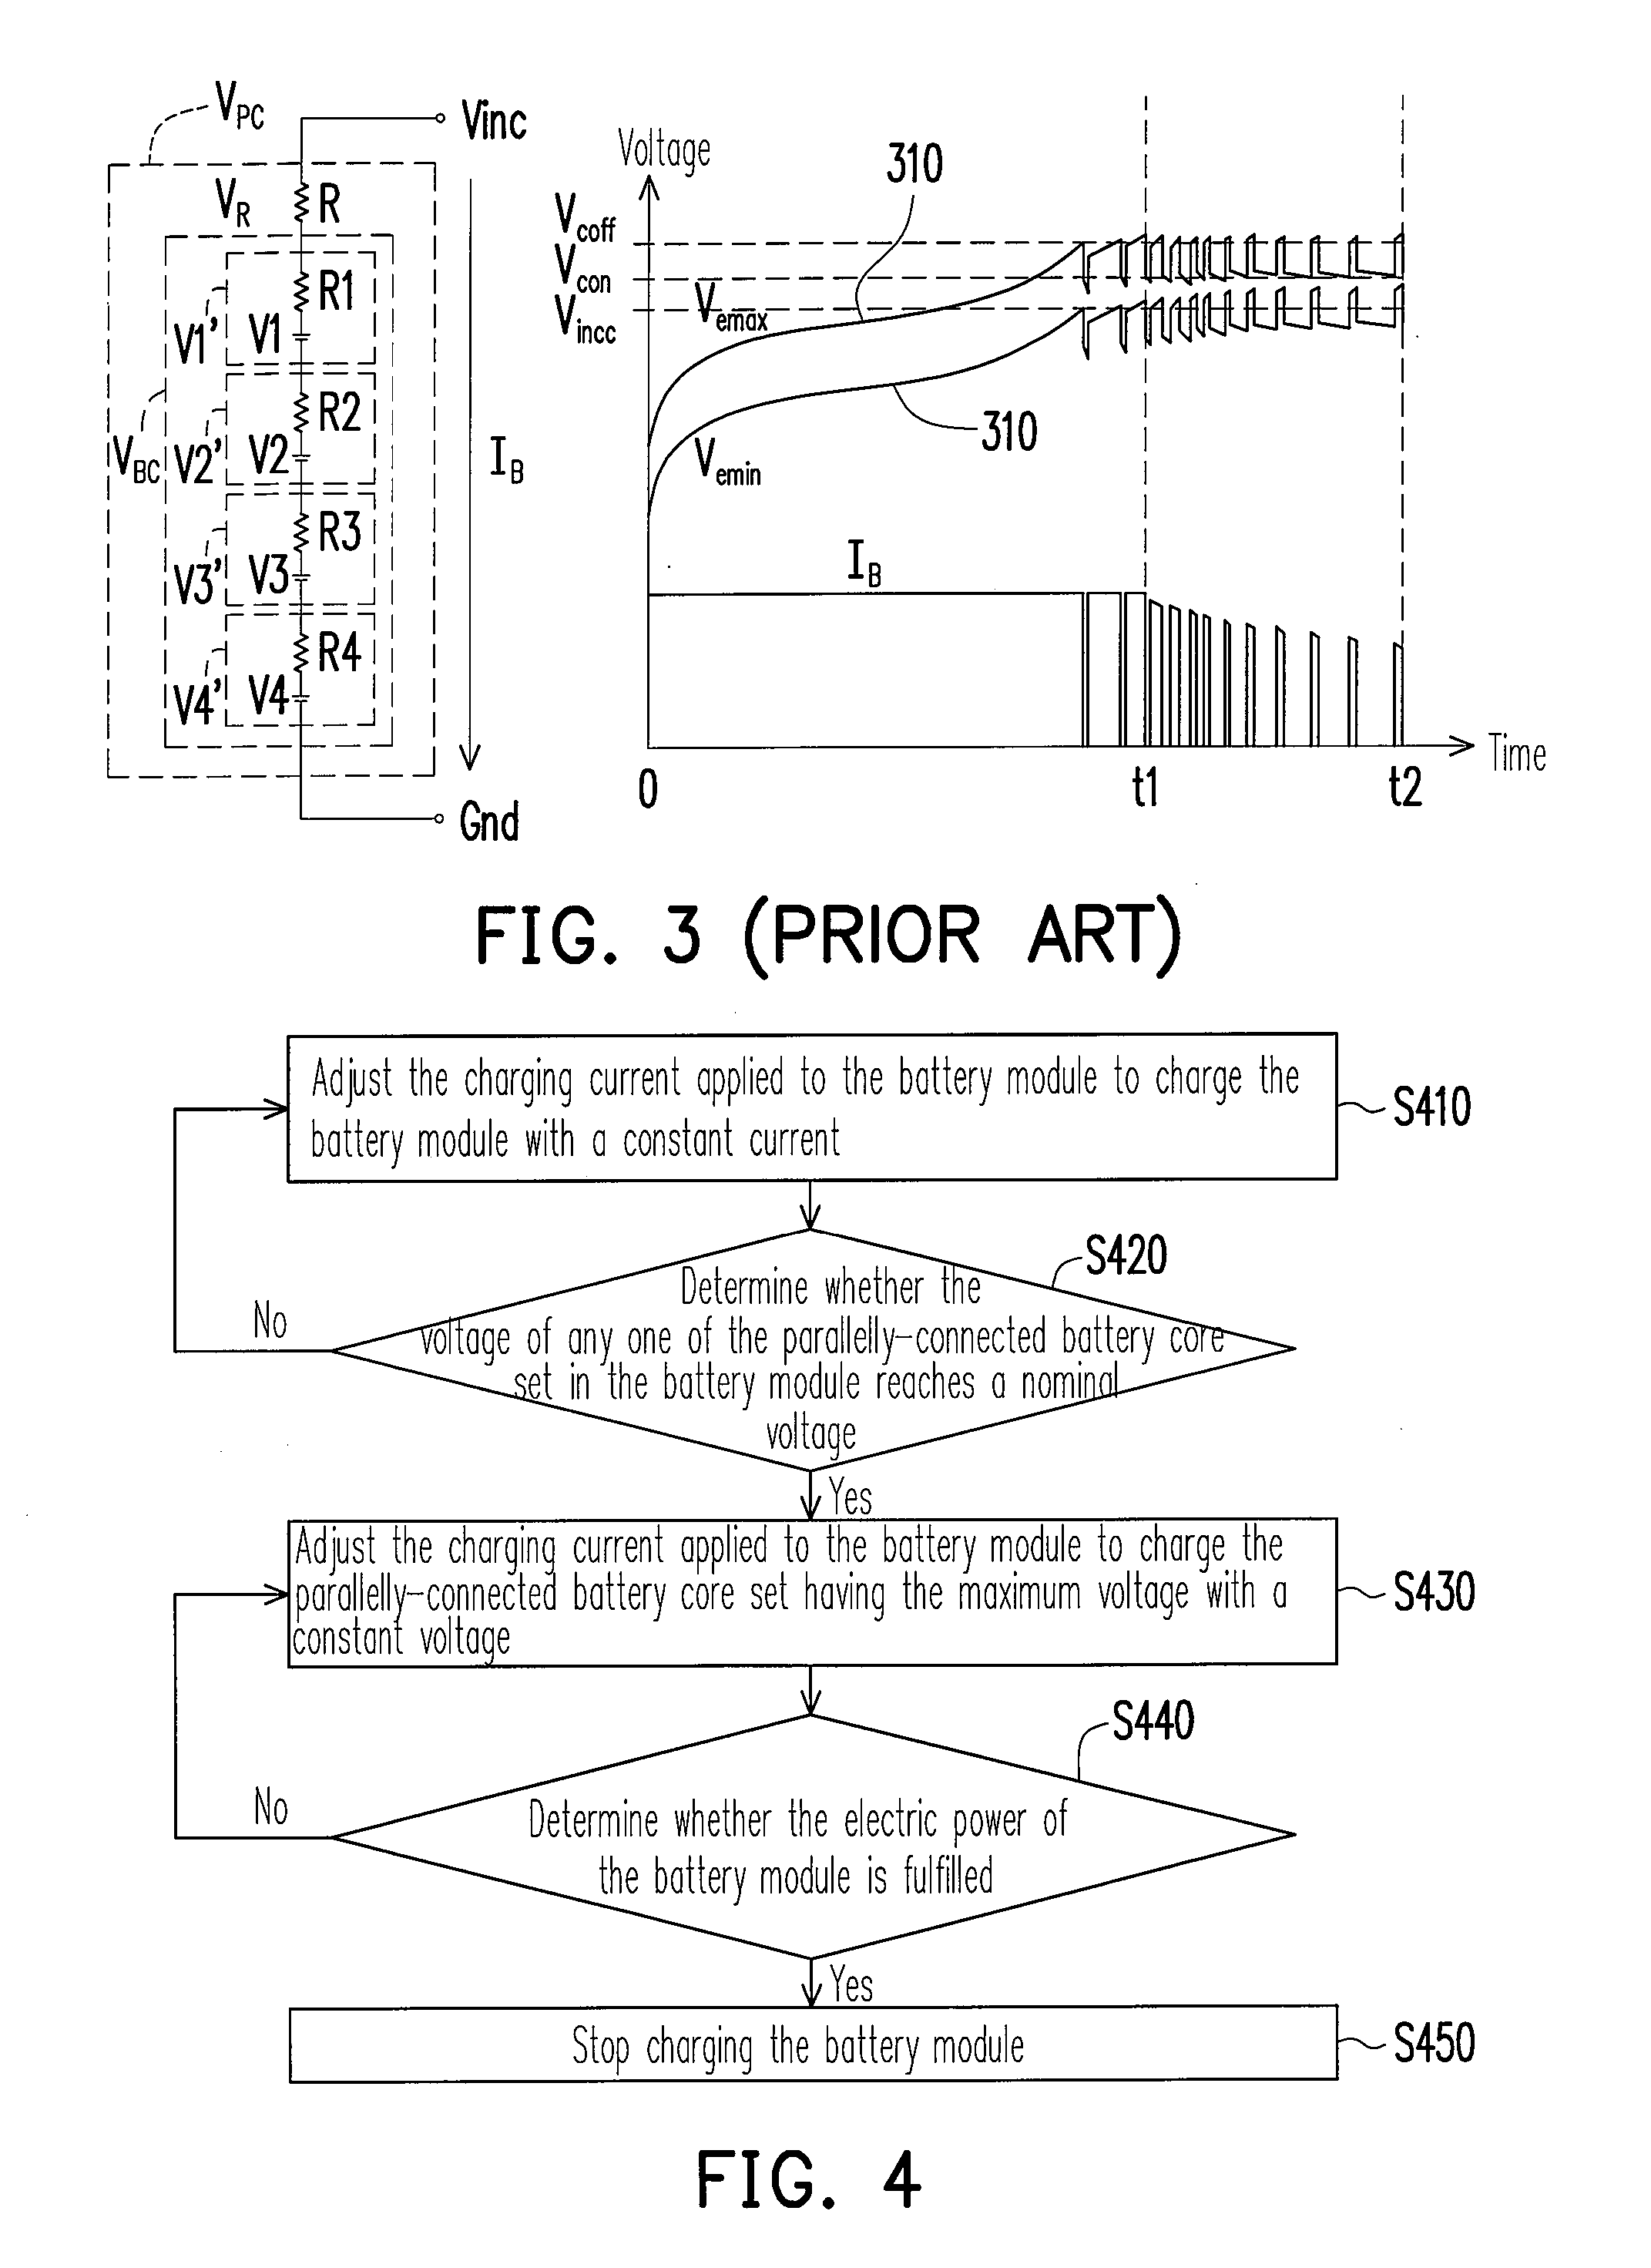 Method for charging battery module